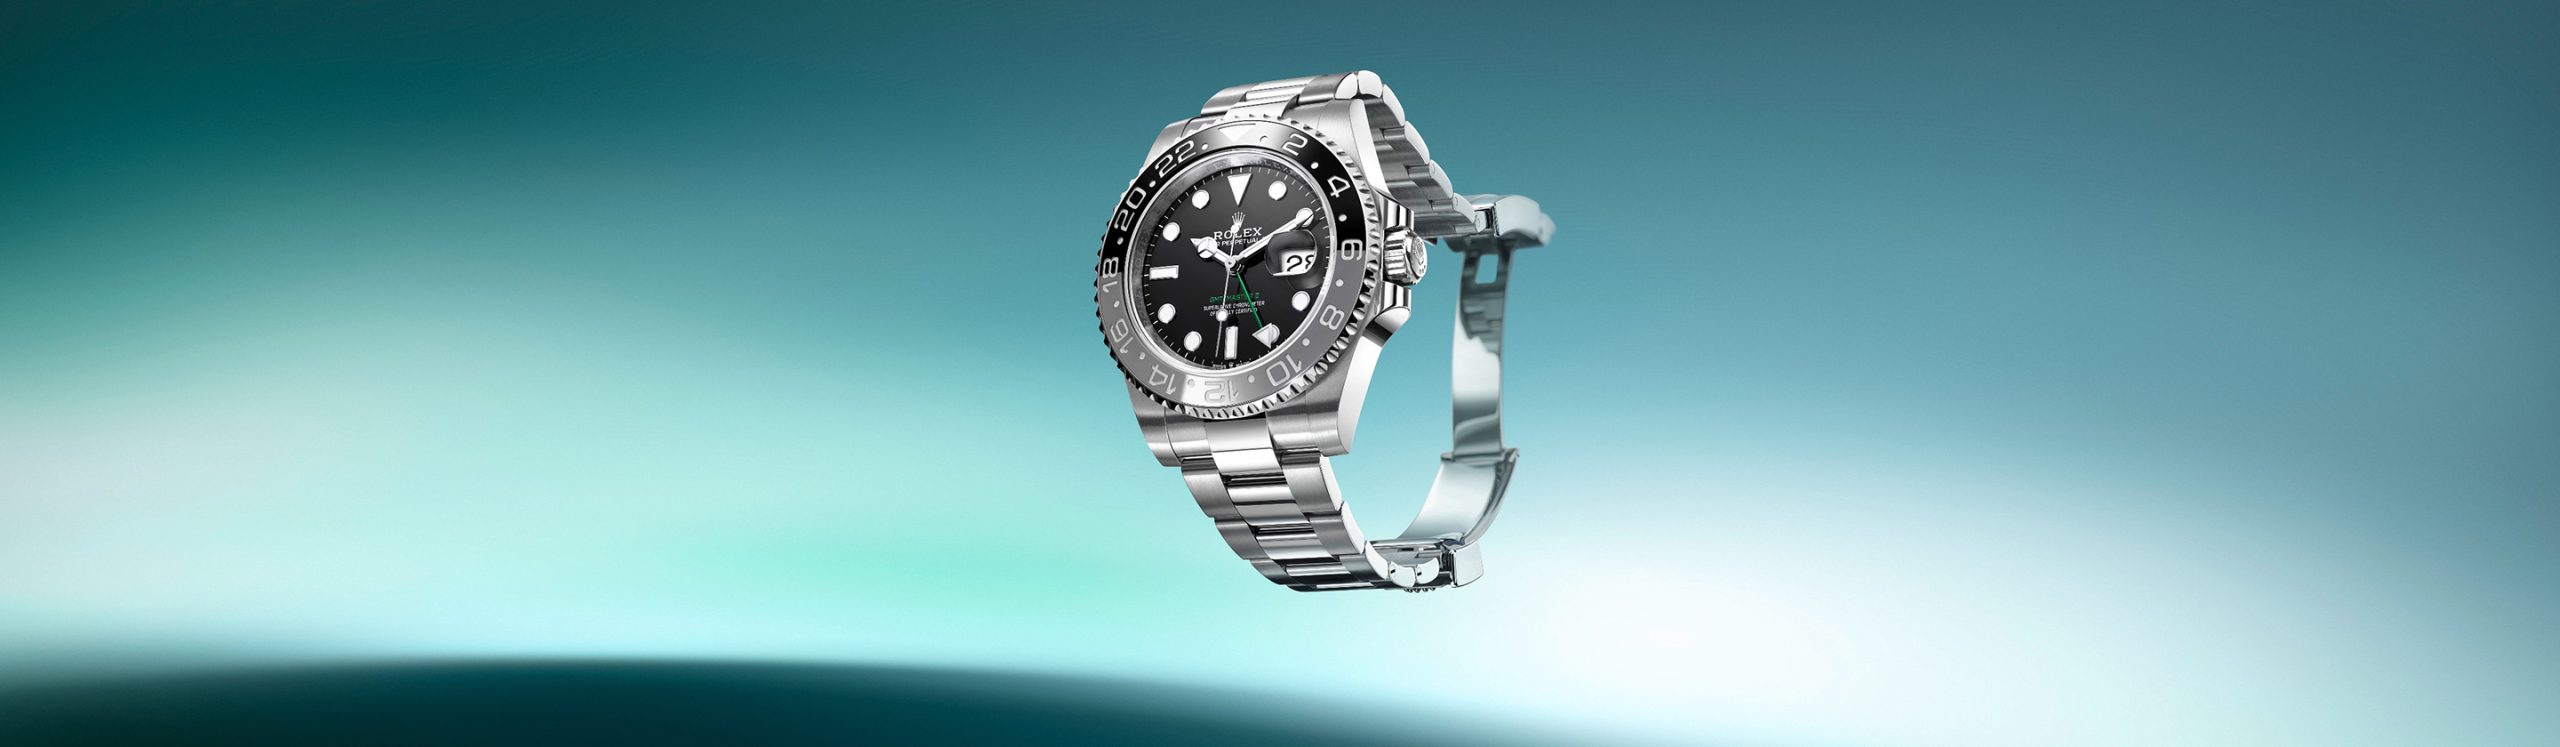 Servicing-Your-Rolex-Cover-Scaled-1